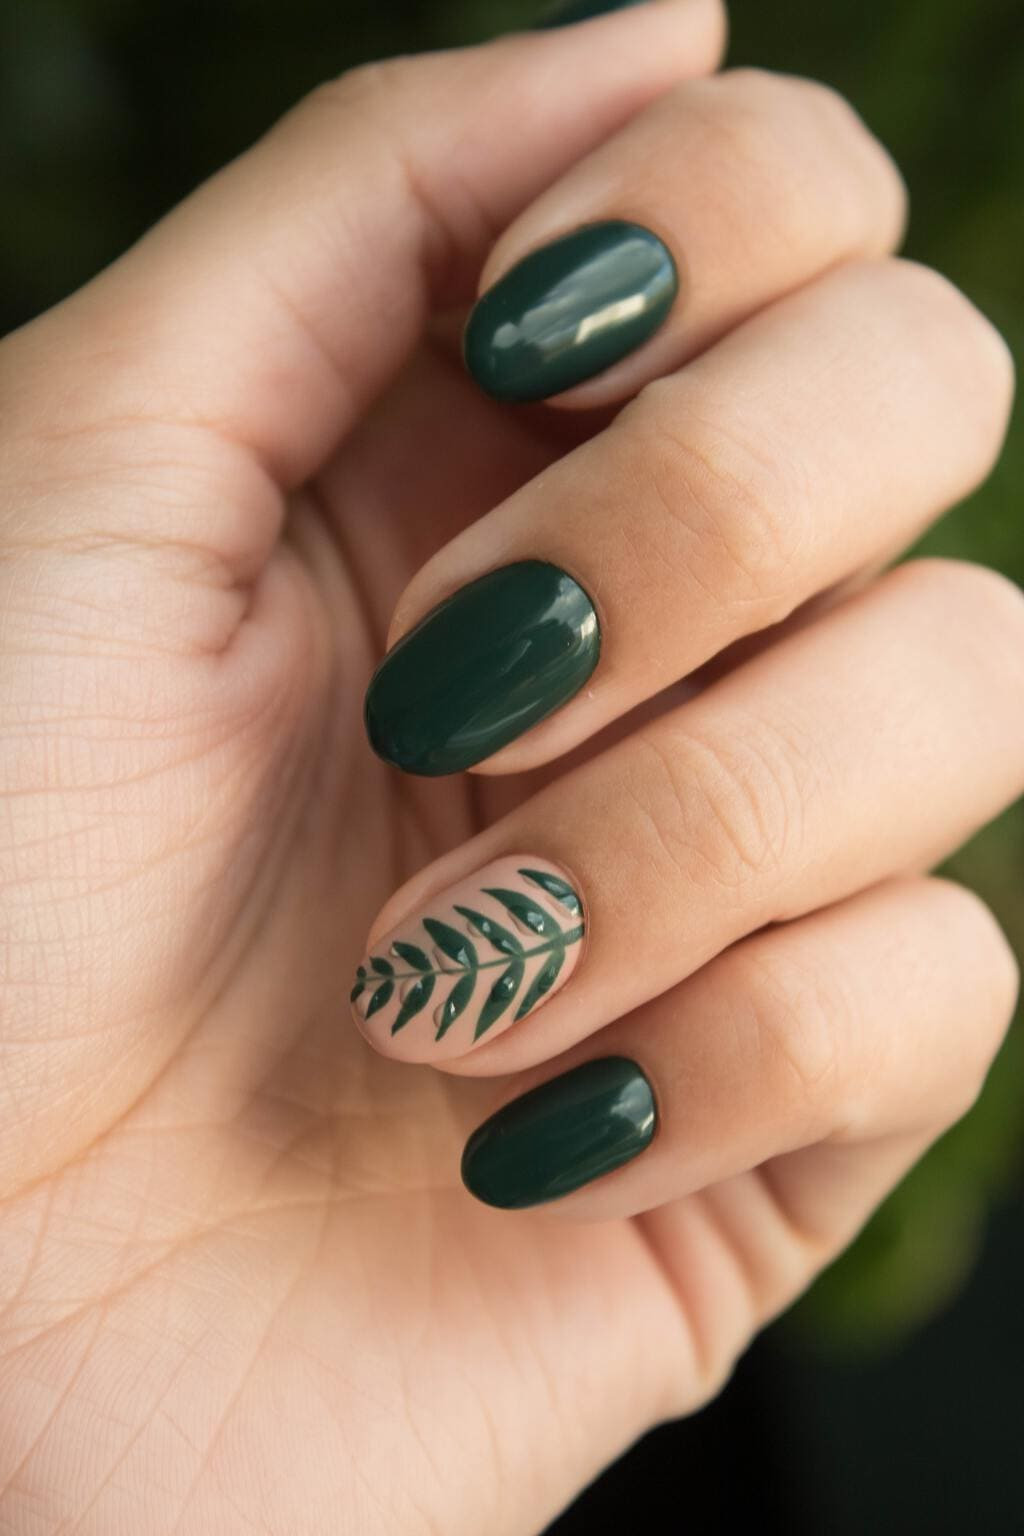 Pics Of Nail Designs
 Quiz Which Summer 2019 Nail Art Trend Should You Try